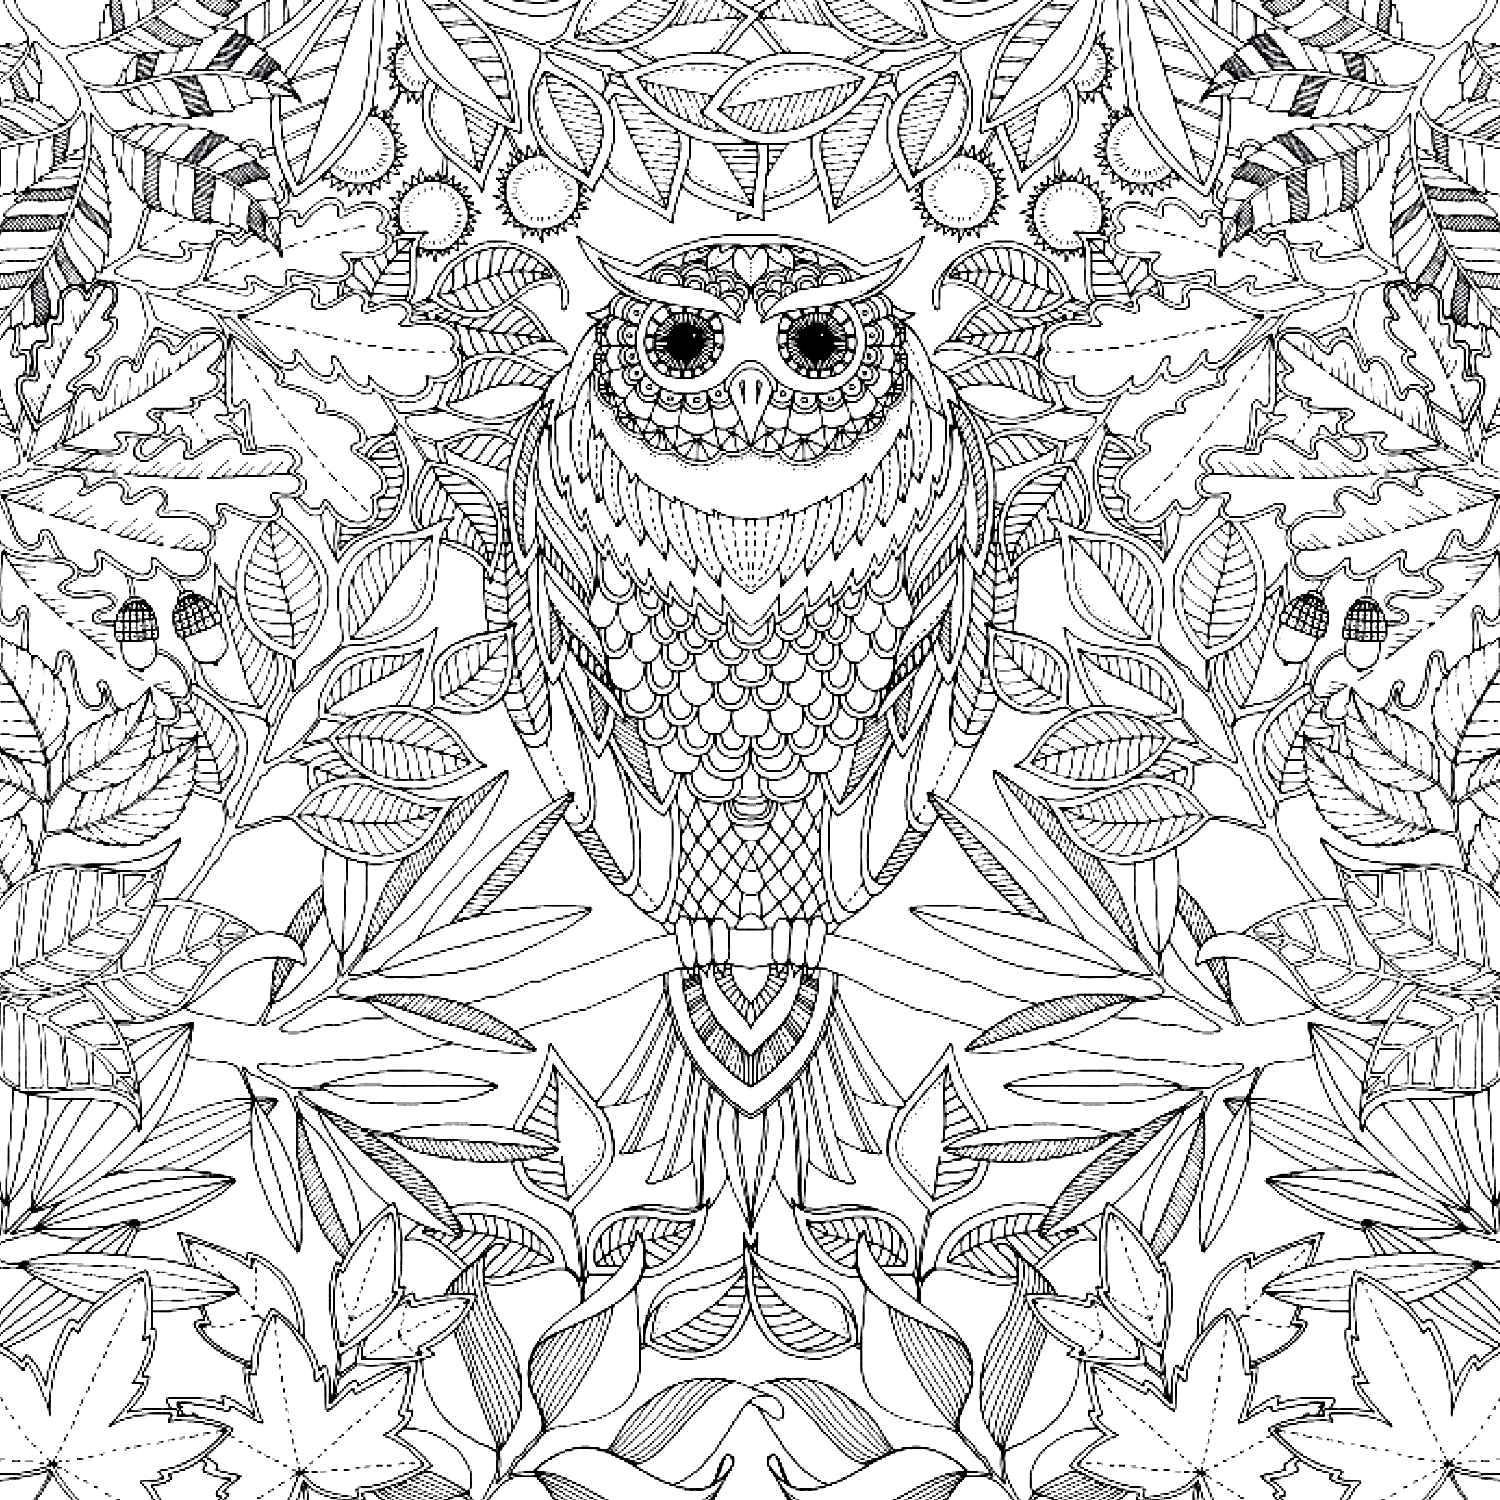 Download Art Therapy #23089 (Relaxation) - Printable coloring pages